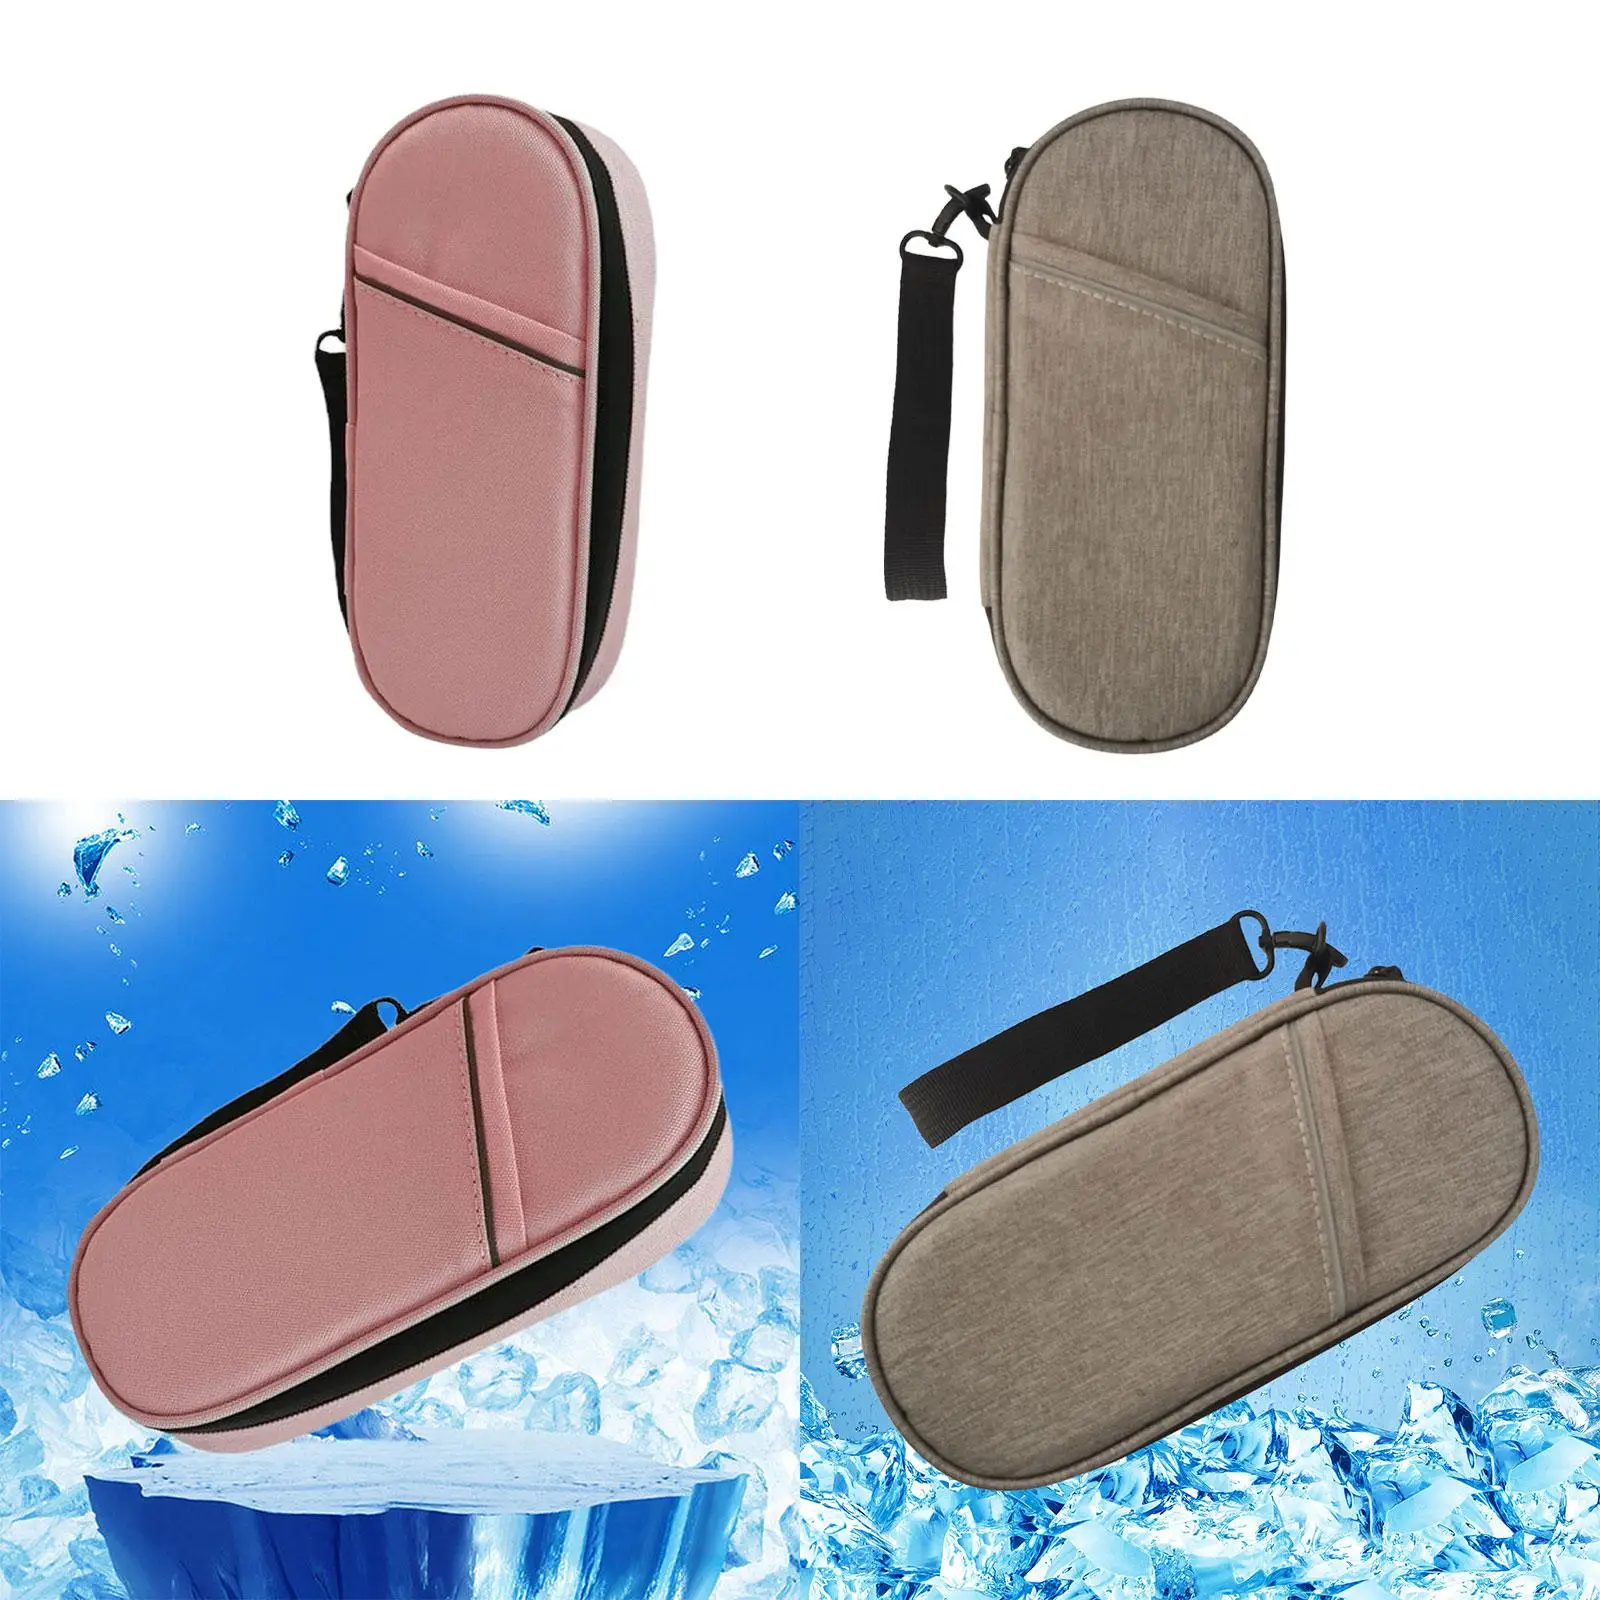 Pill Cooling Bag for Monitor Supplies Zipper Closure Travel Medication Bag Multi Layers Compact Size Medicine Bag Cooling Cases